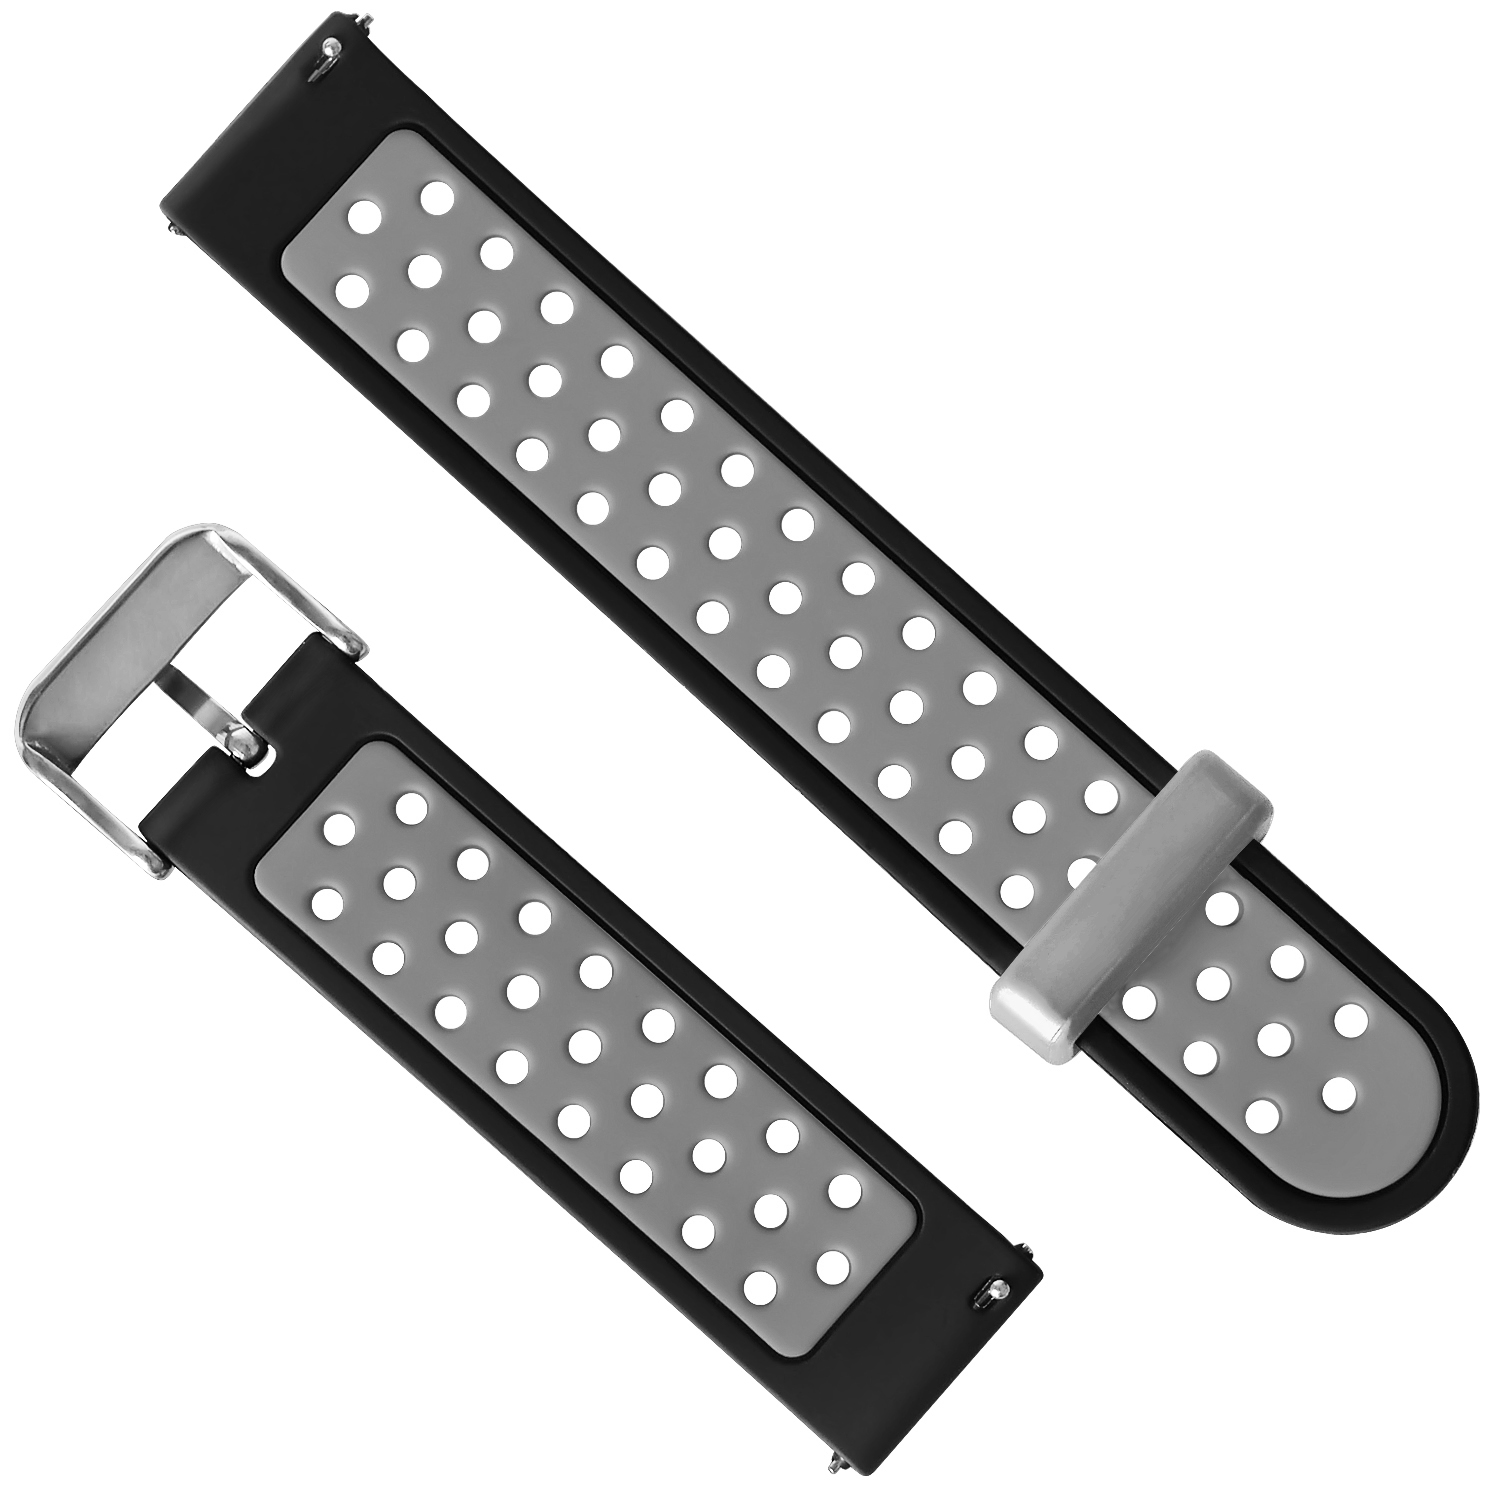 Bakeey-Silicone-Watch-Band-Replacement-Watch-Strap-for-Amazfit-GTS-Smart-Watch-1567973-3